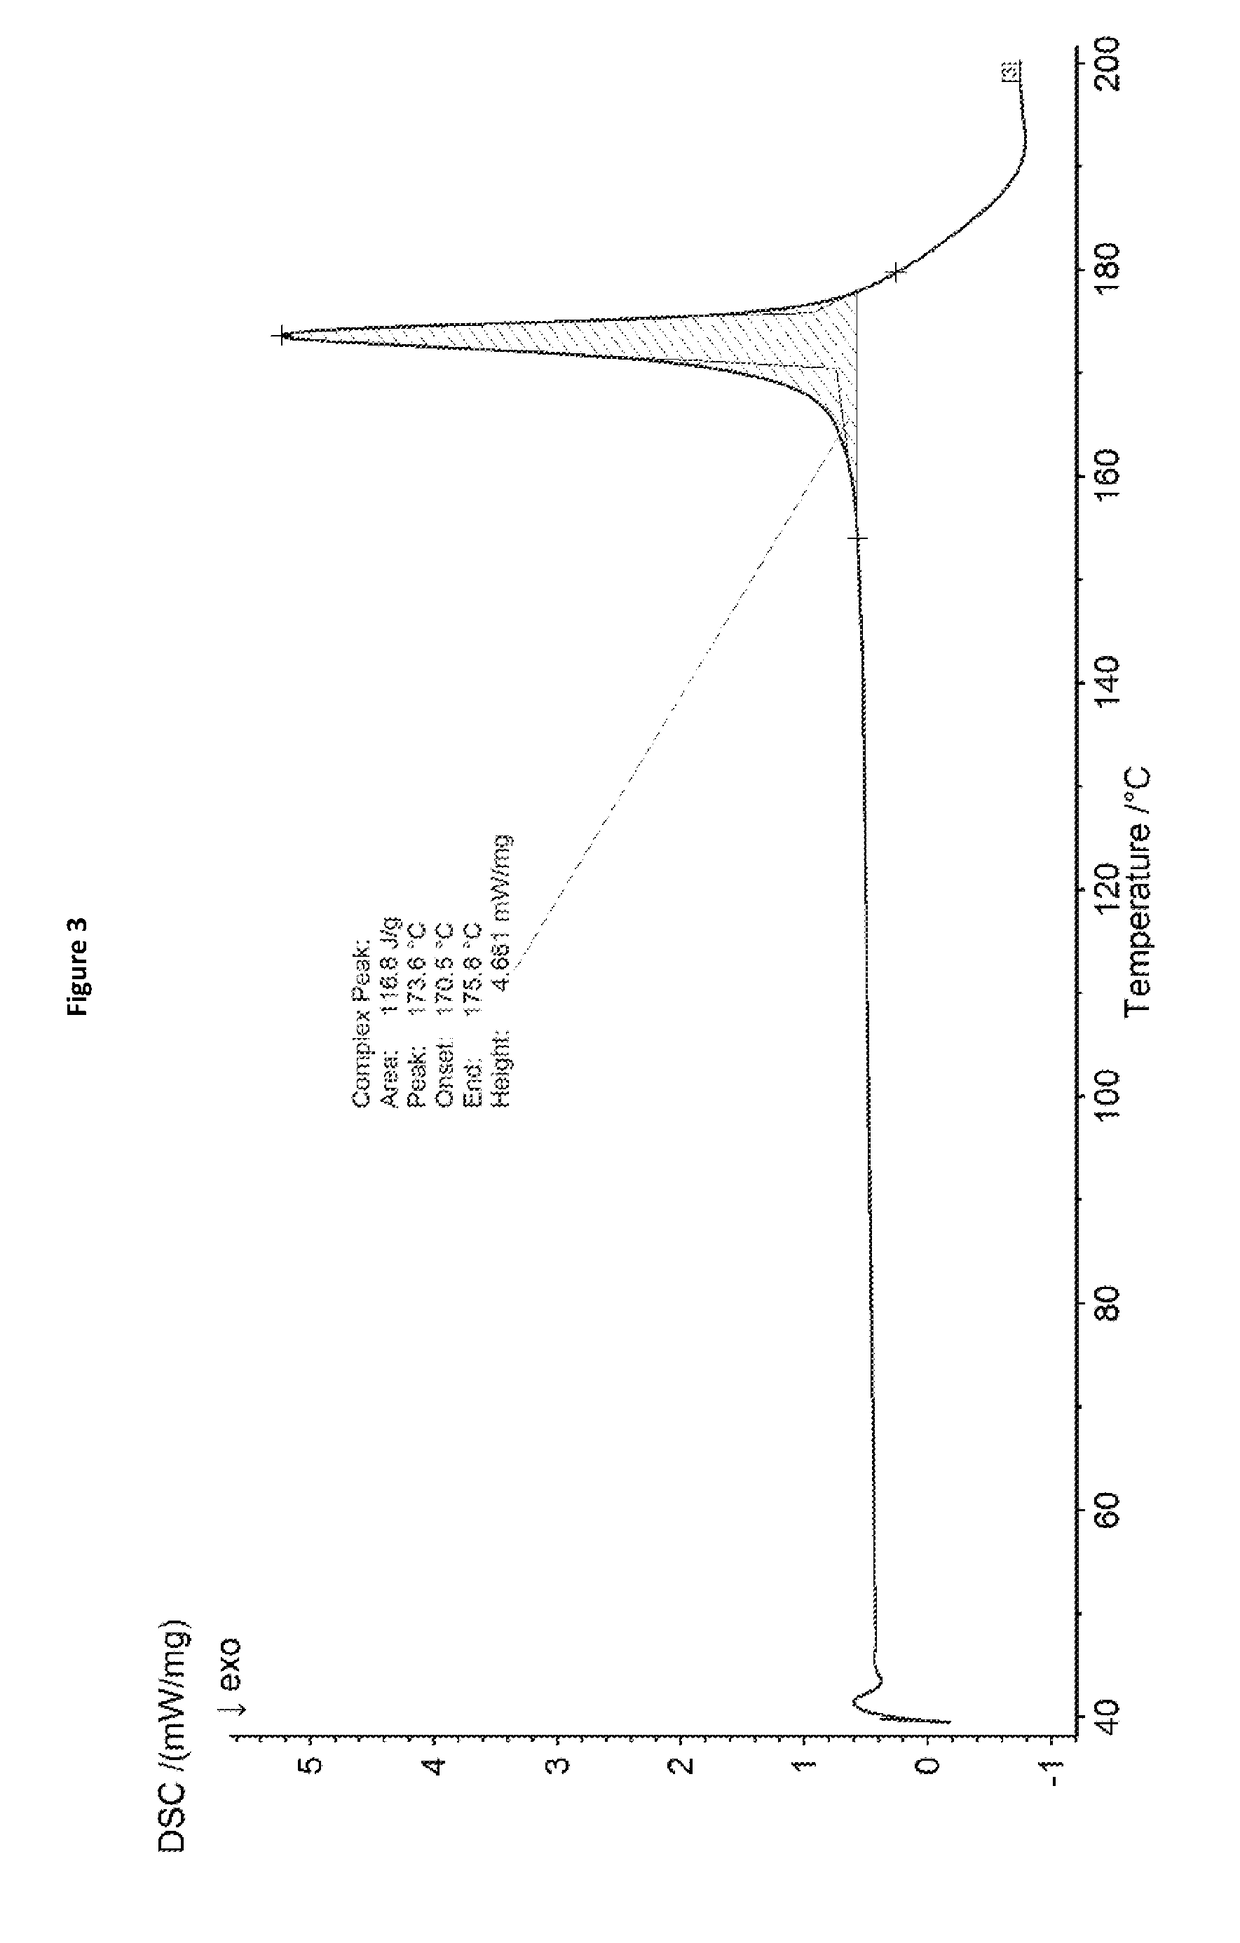 Synergistic herbicidal composition and use thereof